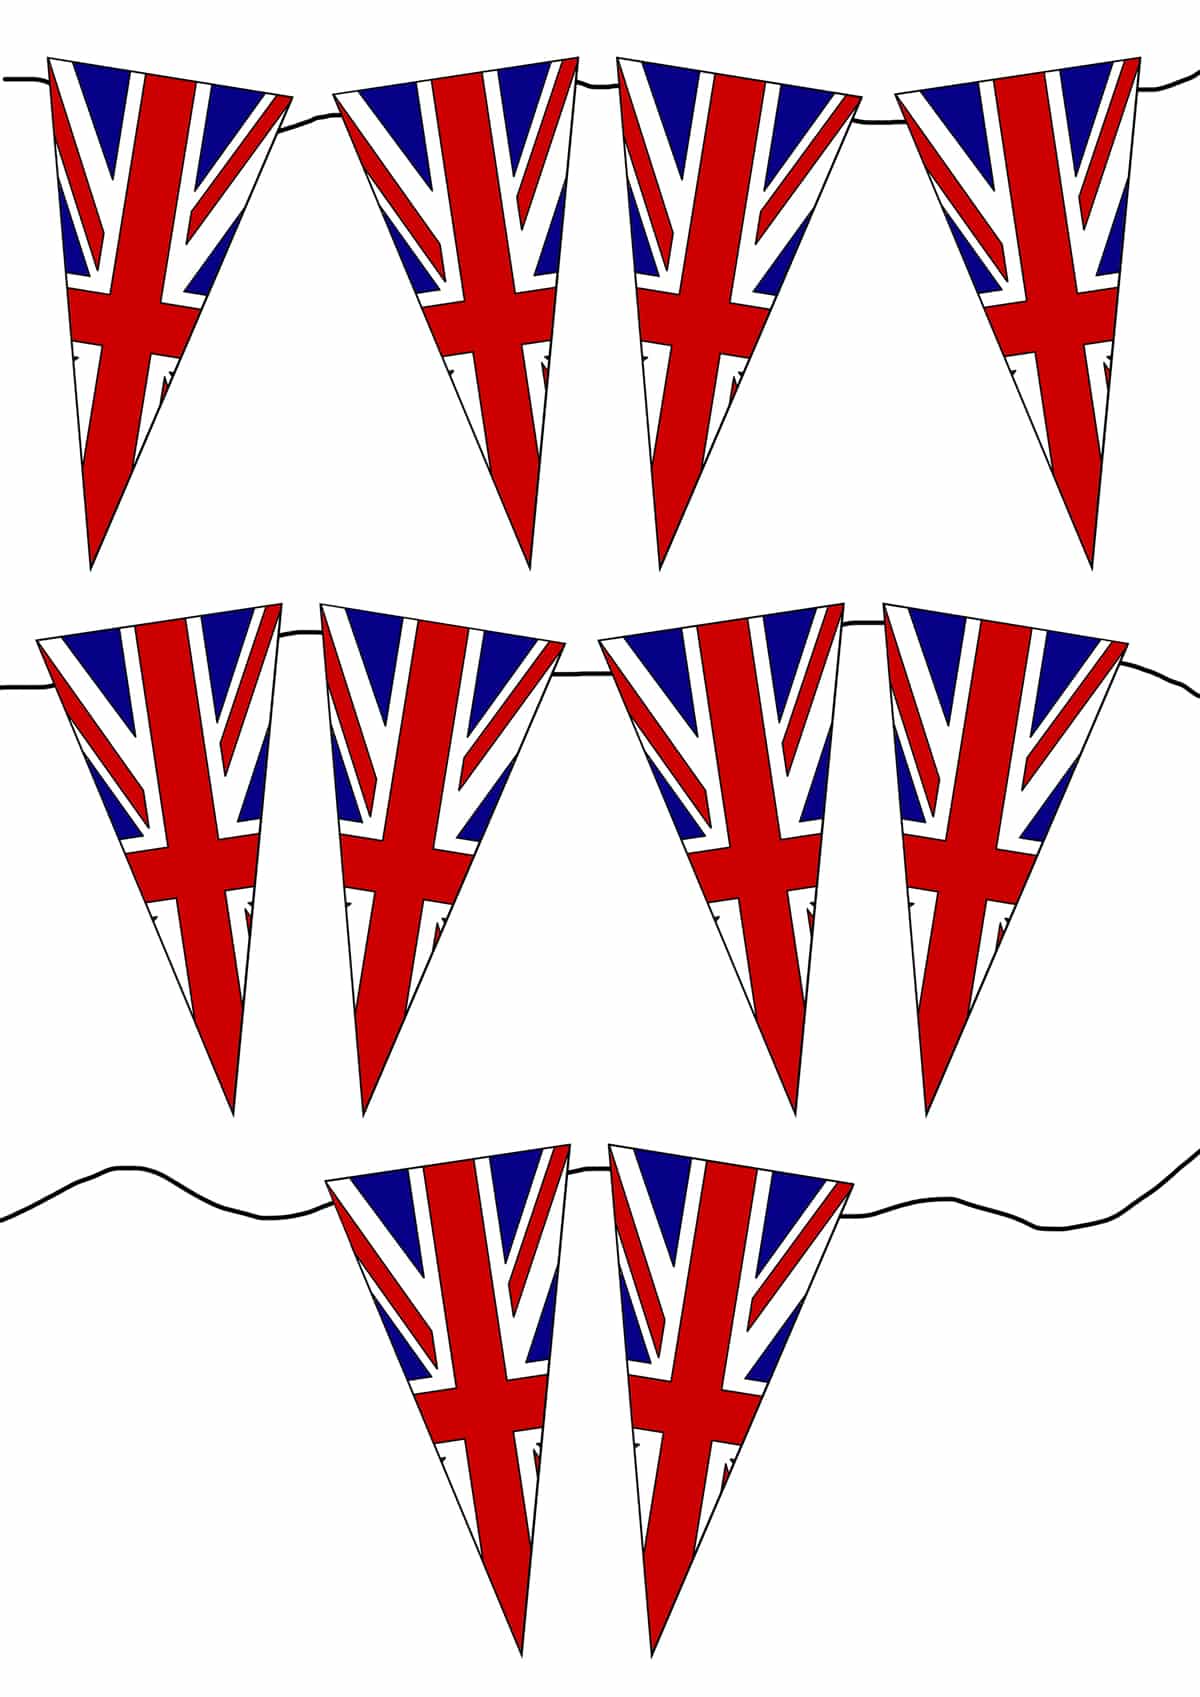 printed coloured sheet of union jack bunting being coloured in cut out and shown as individual pieces with string connecting them.